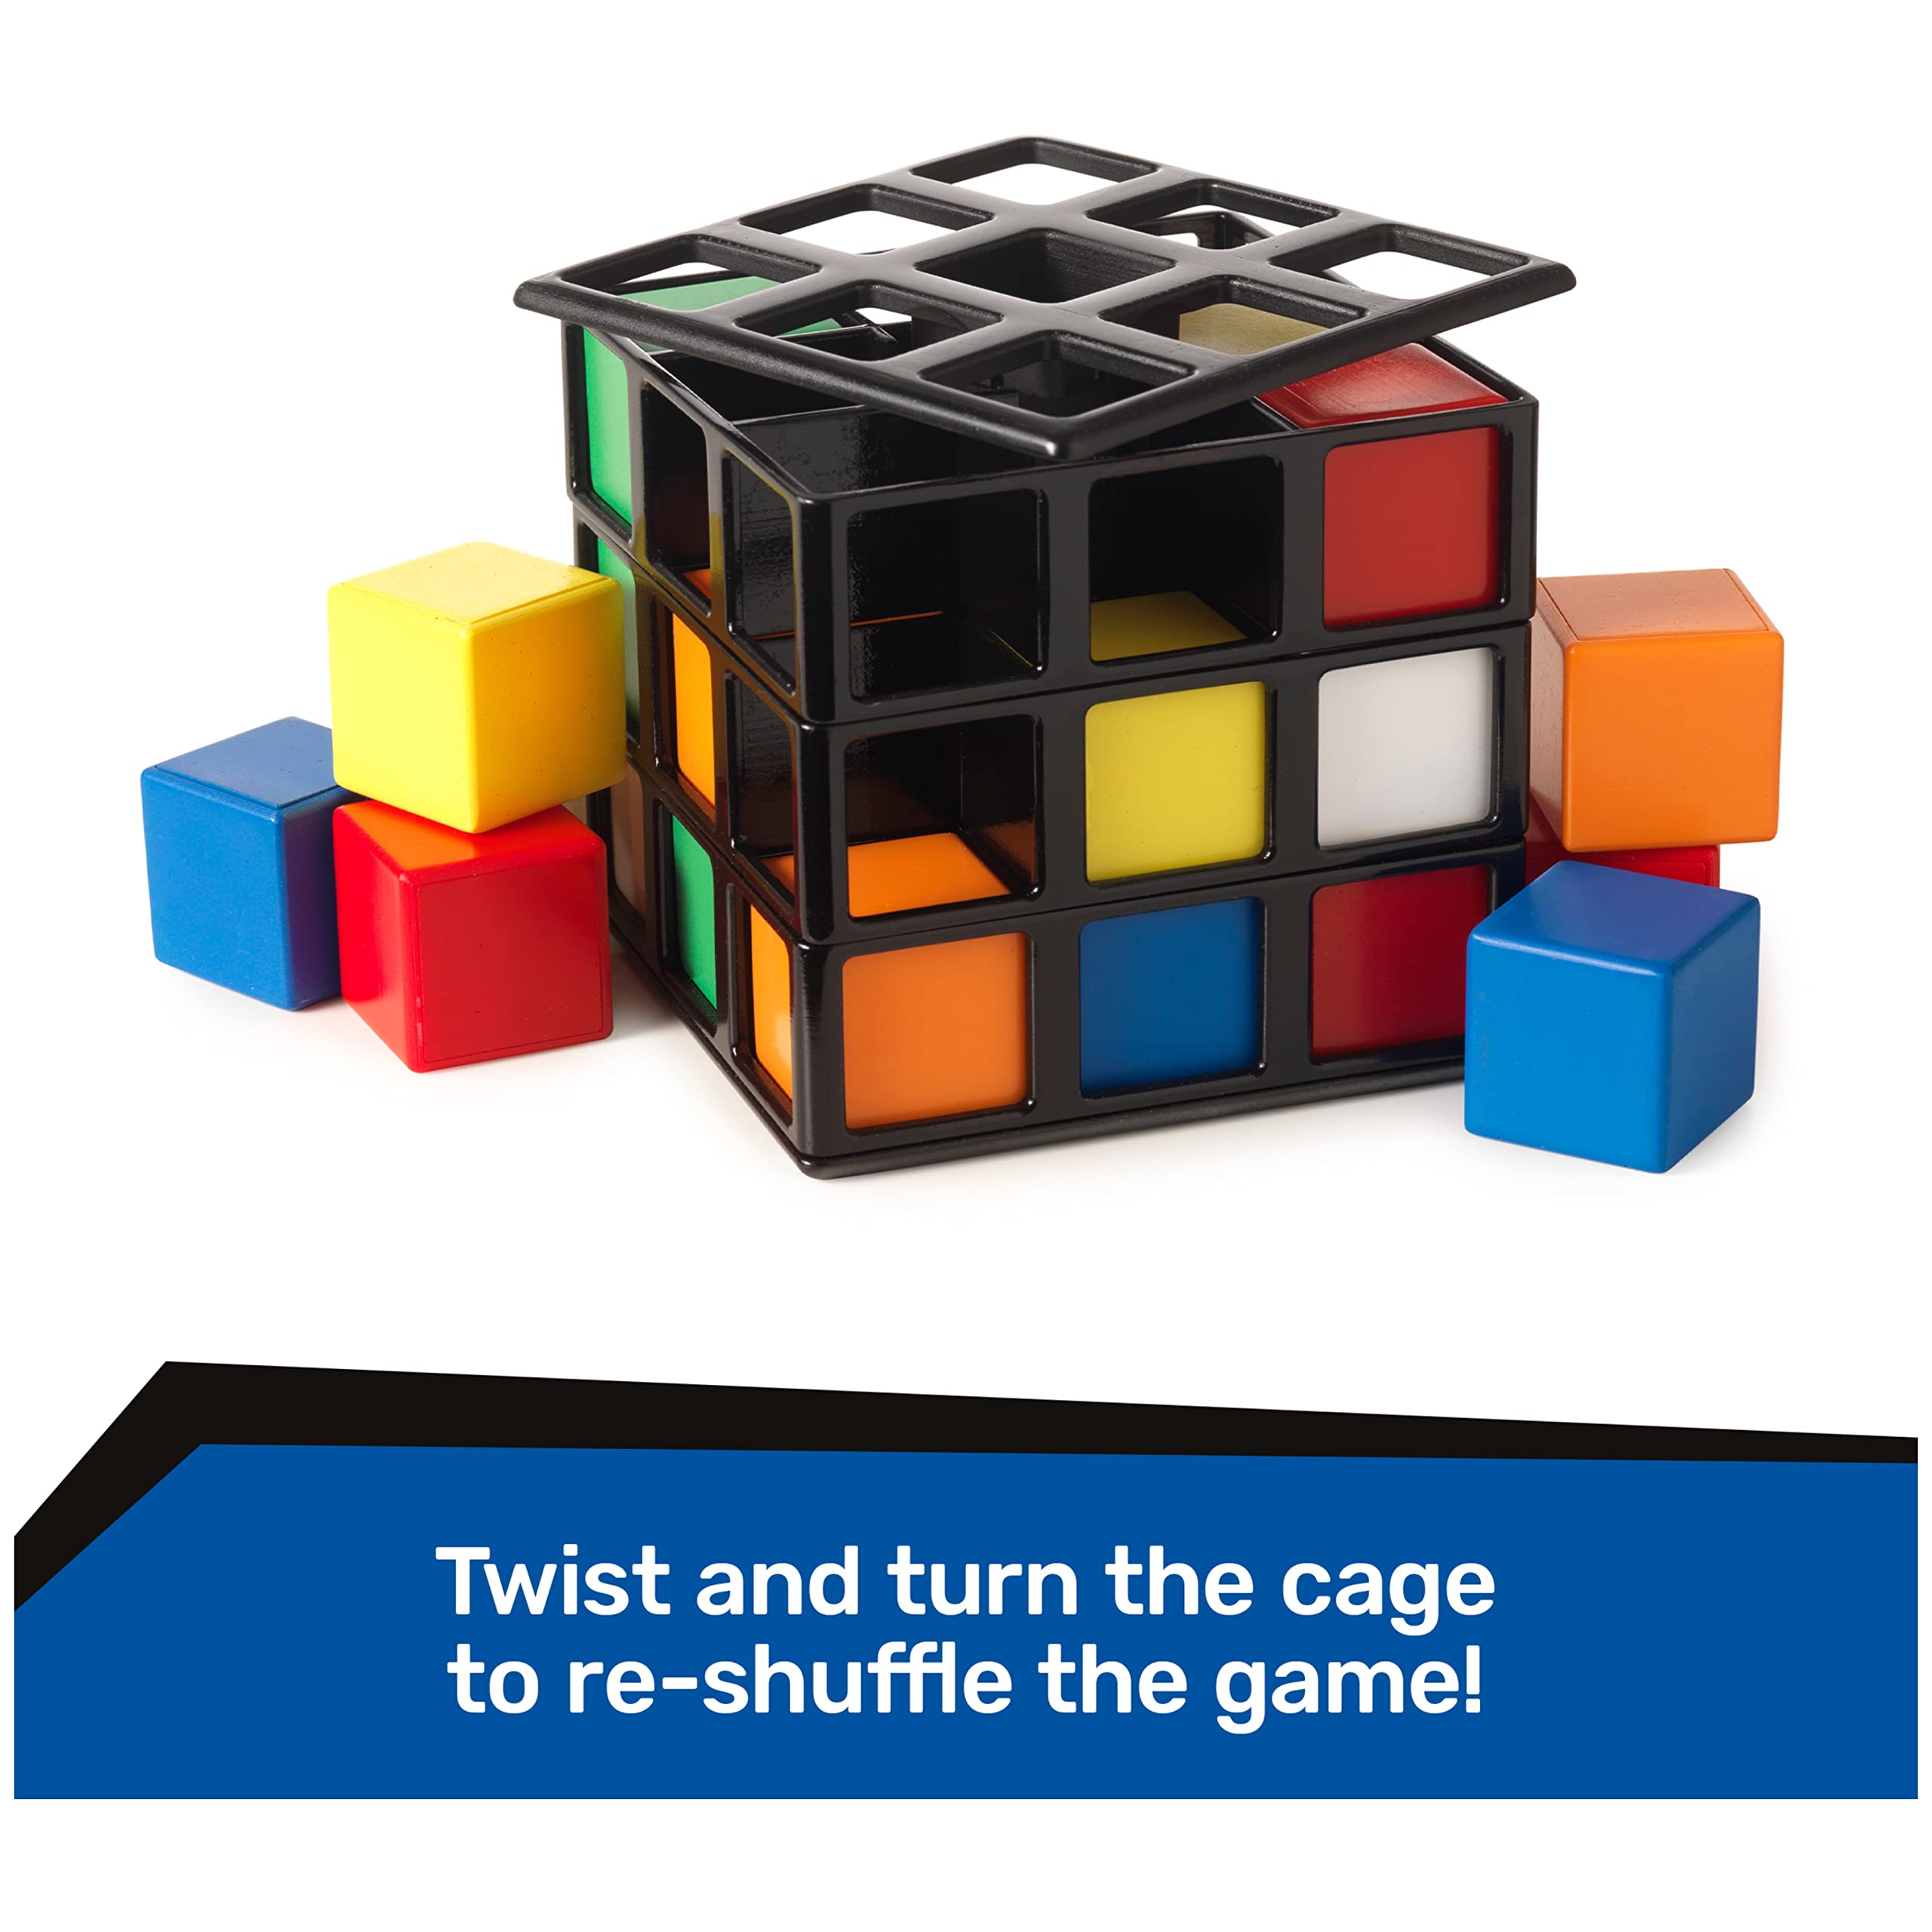 Rubik’s Cage, 3D Fast-Paced Strategy Sequence Game Color Stacking Challenging Toy Puzzle-Solving Activity Brain, for Adults & Kids Ages 7 and up